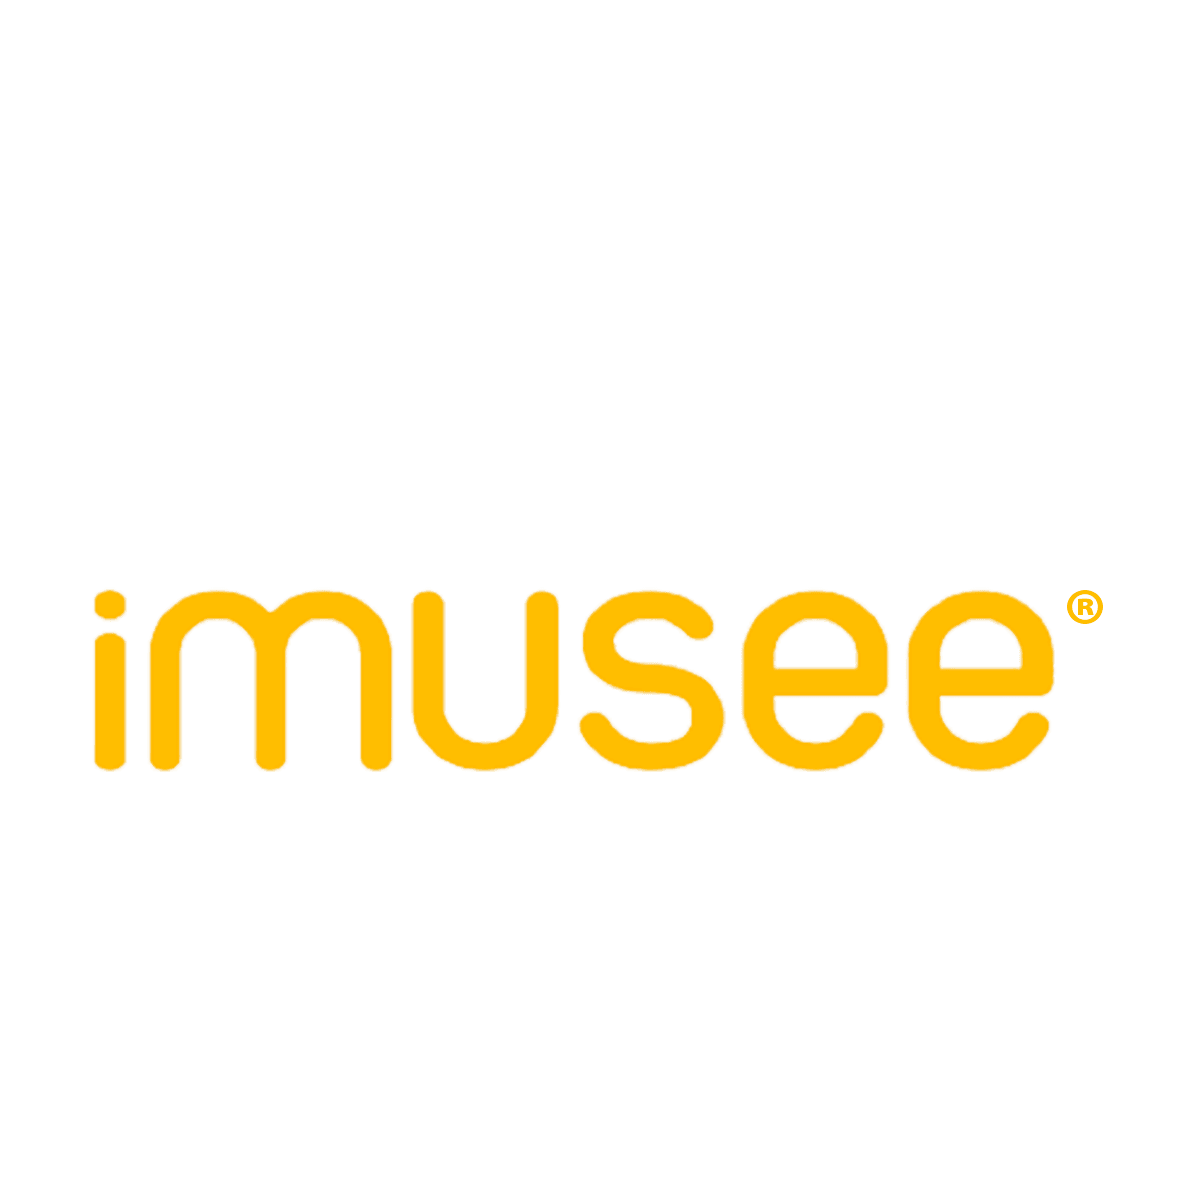 imusee